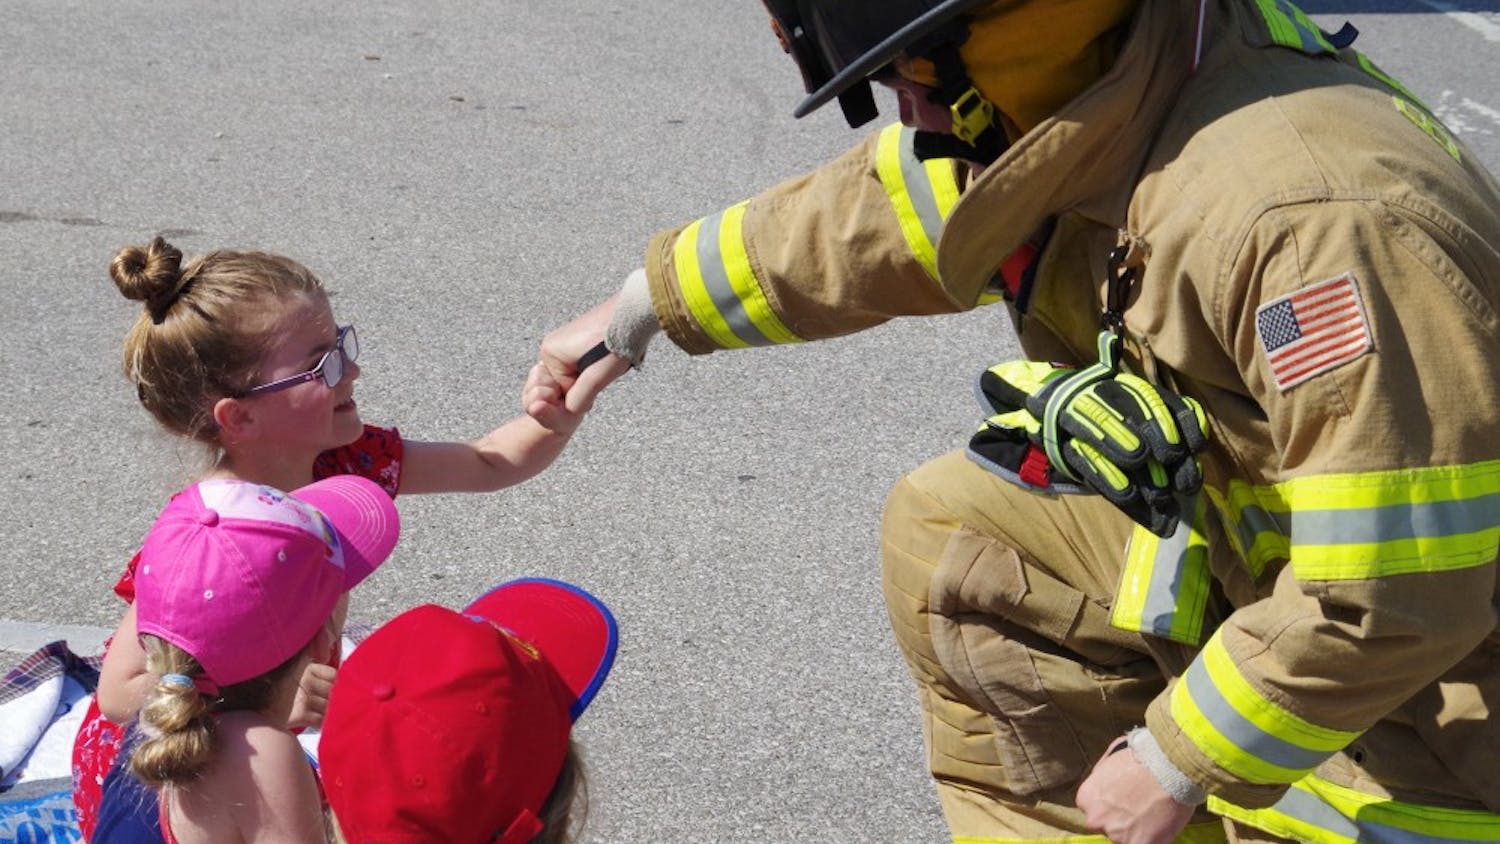 Firefighter and Child 